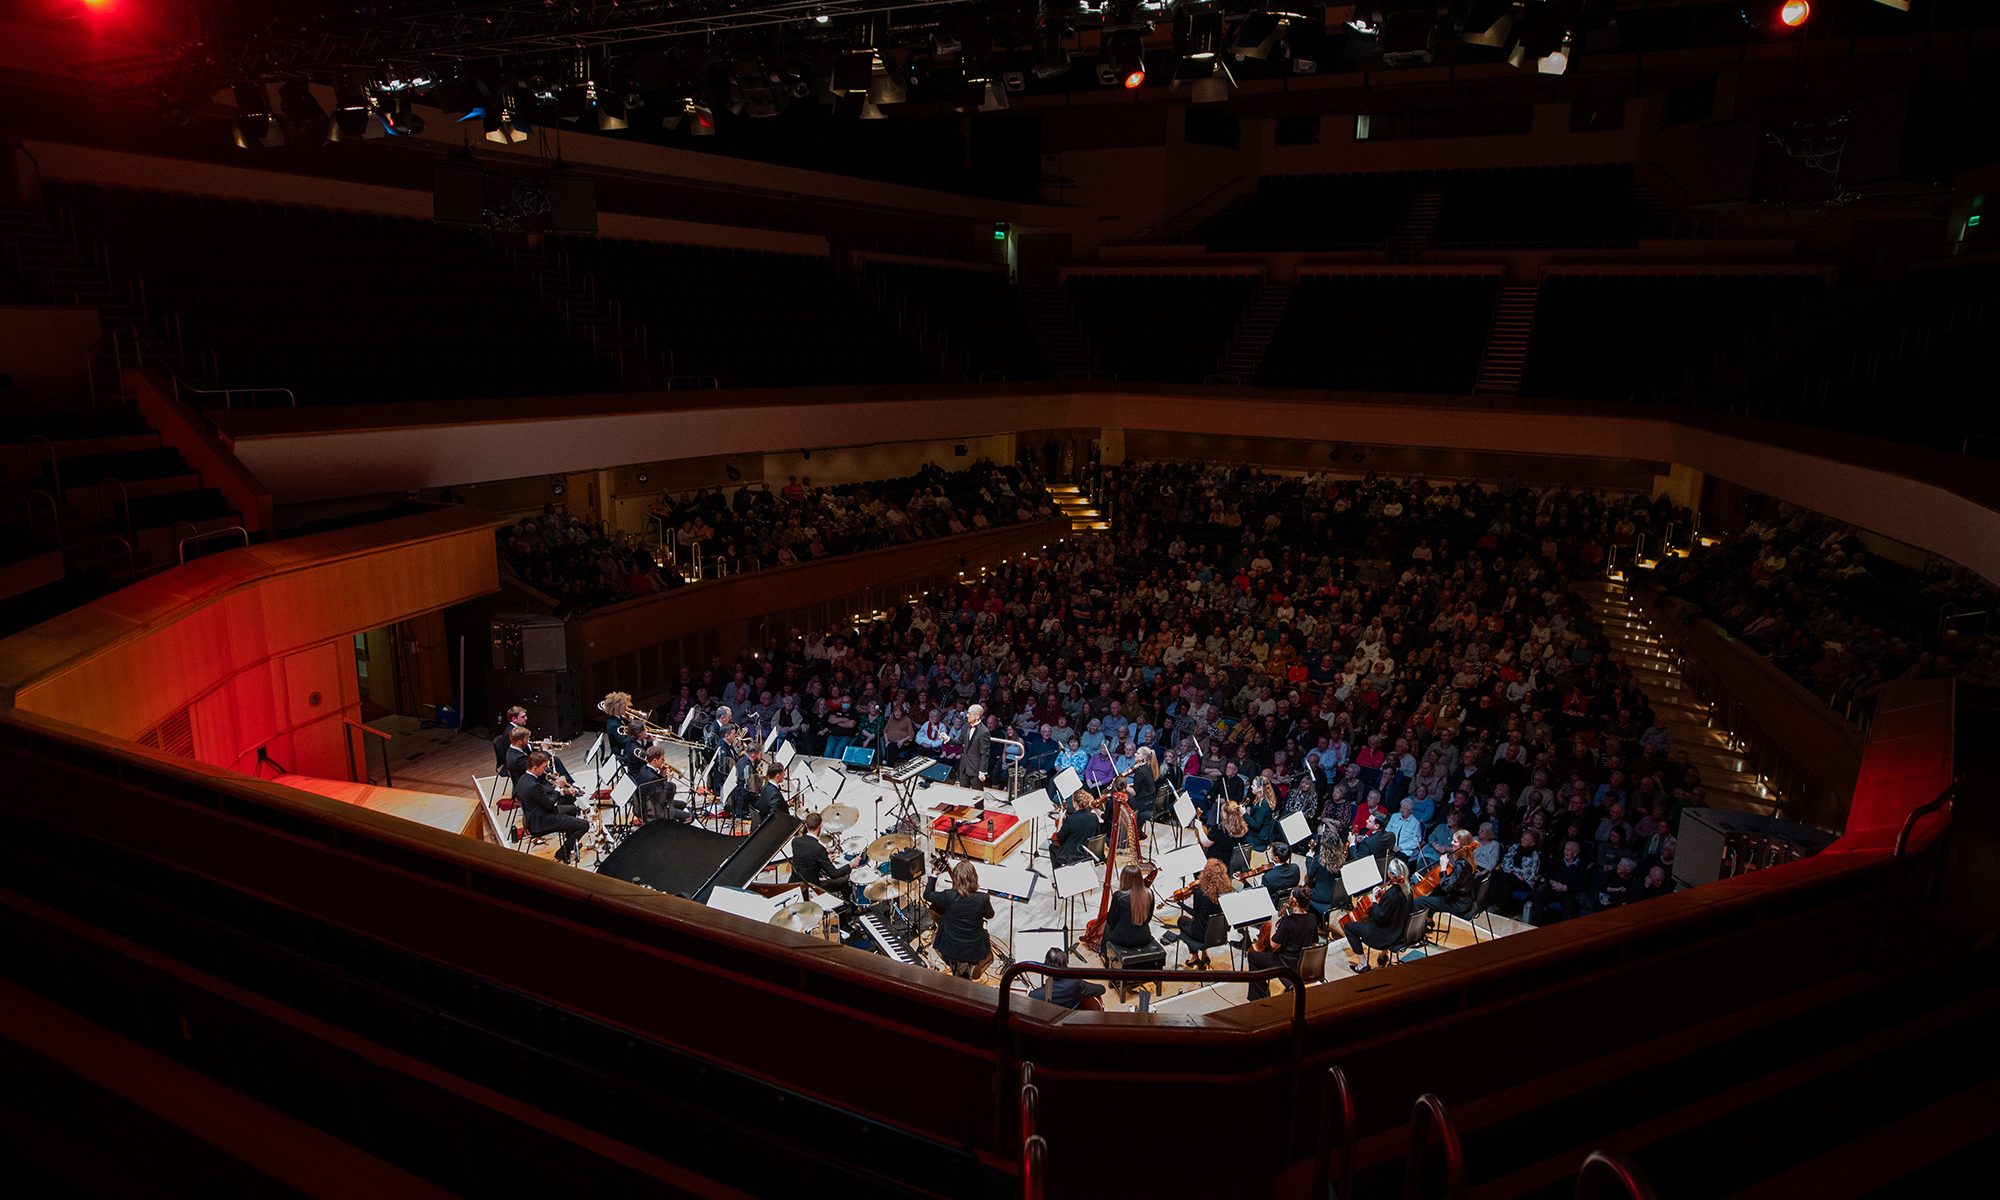 Mike Paul-Smith conducting the Down for the Count Orchestra at Glasgow Royal Concert Hall